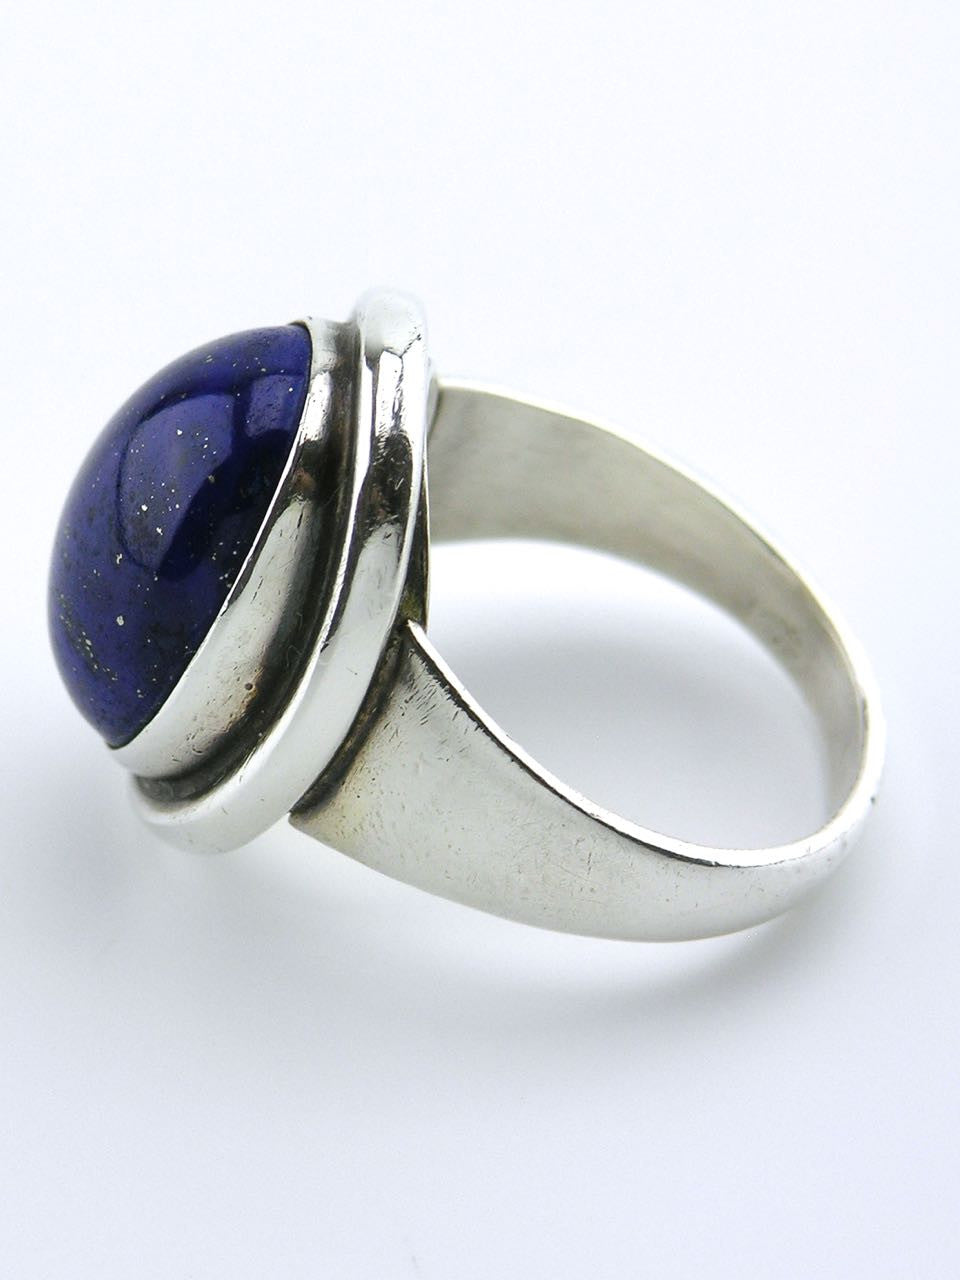 Georg Jensen silver and oval lapis lazuli ring - design 46A